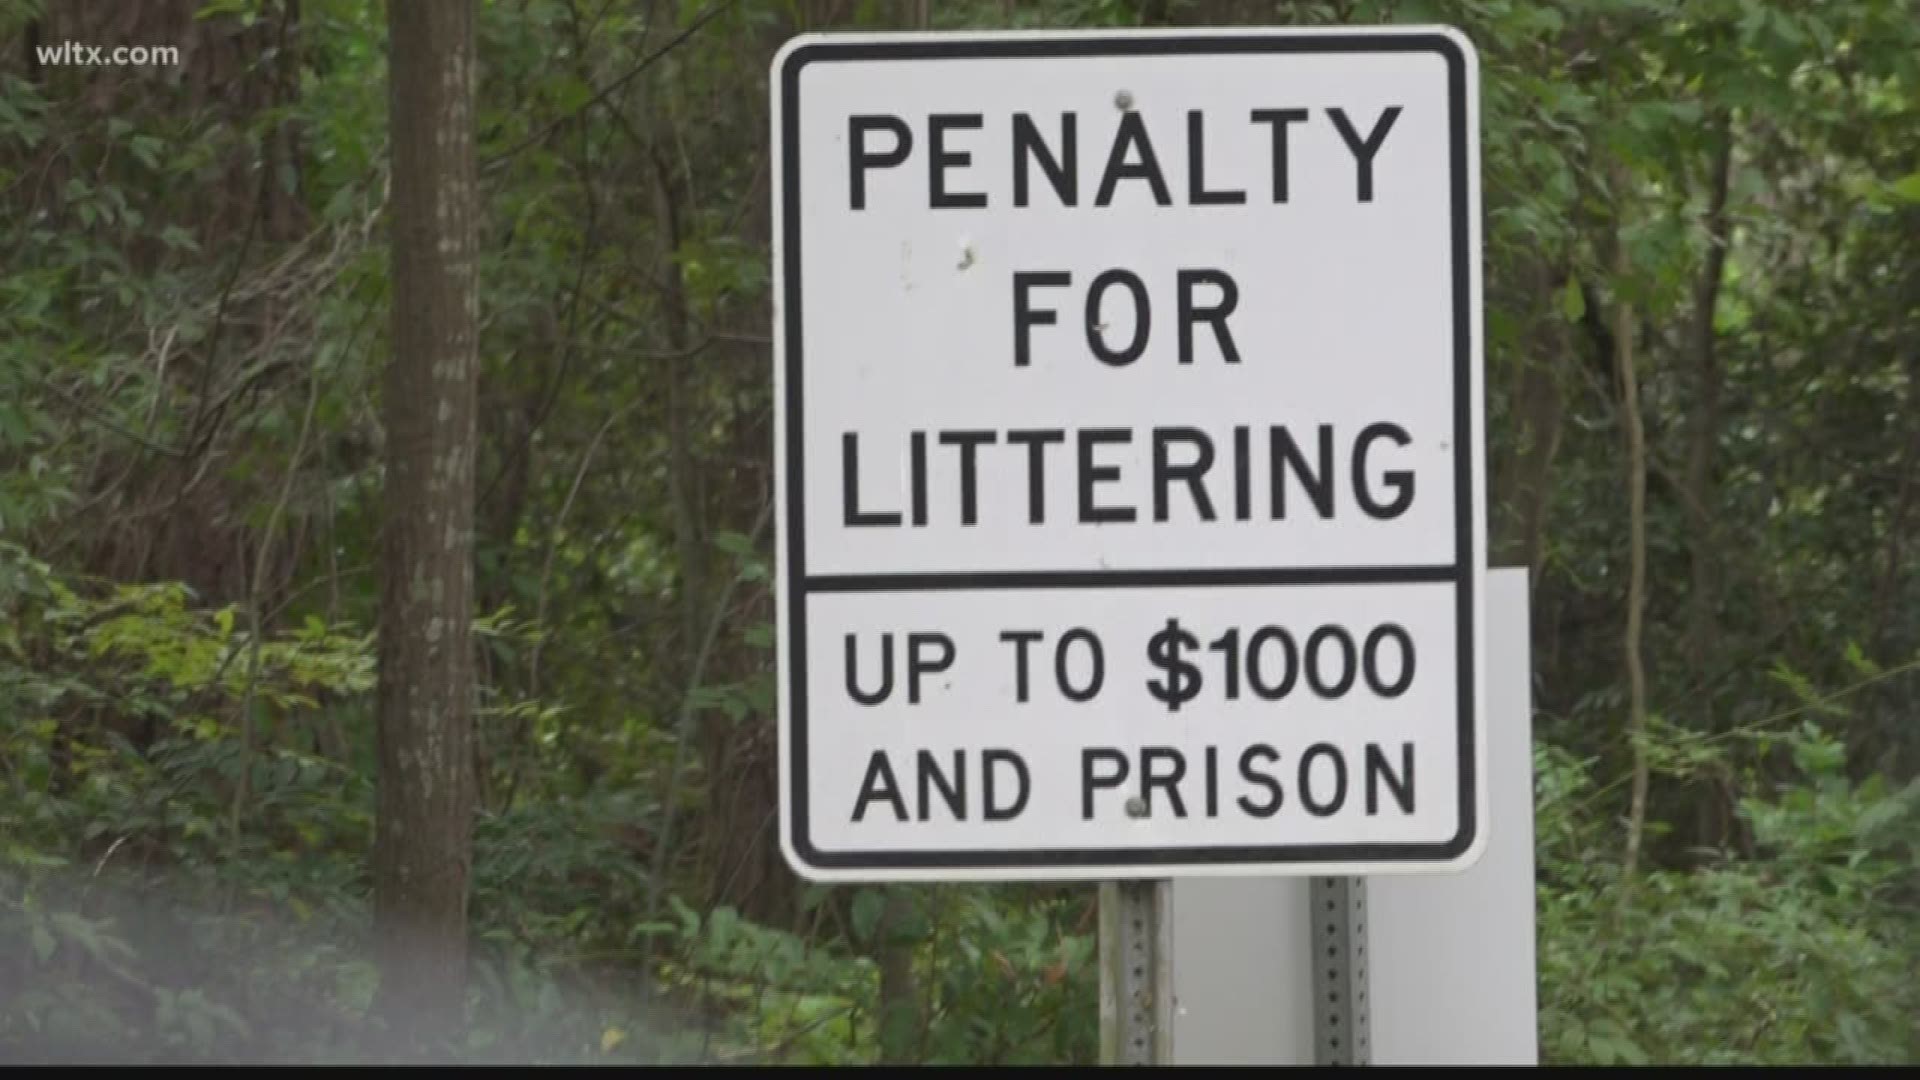 Town council approved to hire high schoolers part-time to help pick up litter around the area.